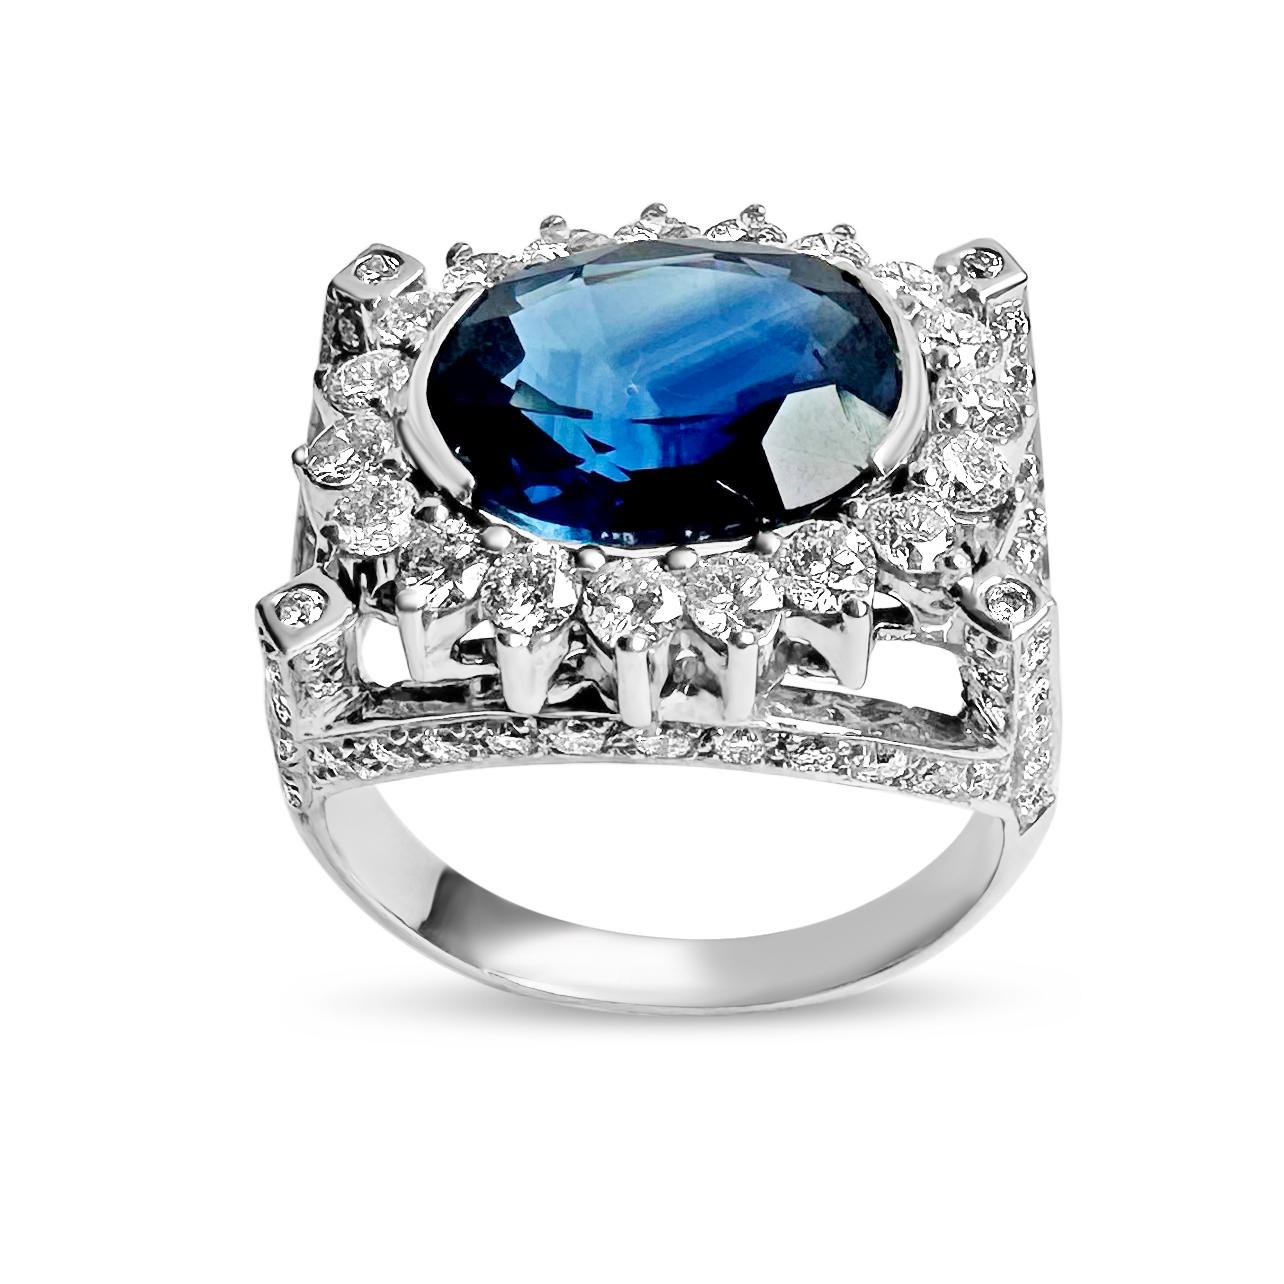 18K White Gold Ring with 125 Round 1.4mm Diamonds 1.74cts G-H VS-SI & 1 Oval 11.3x10.3mm Blue Sapphire 6.15cts

Elevated elegance with the 18K White Gold timeless ring by Manart Gold & Diamond Jewelry. Classic in design and beautifully handcrafted,